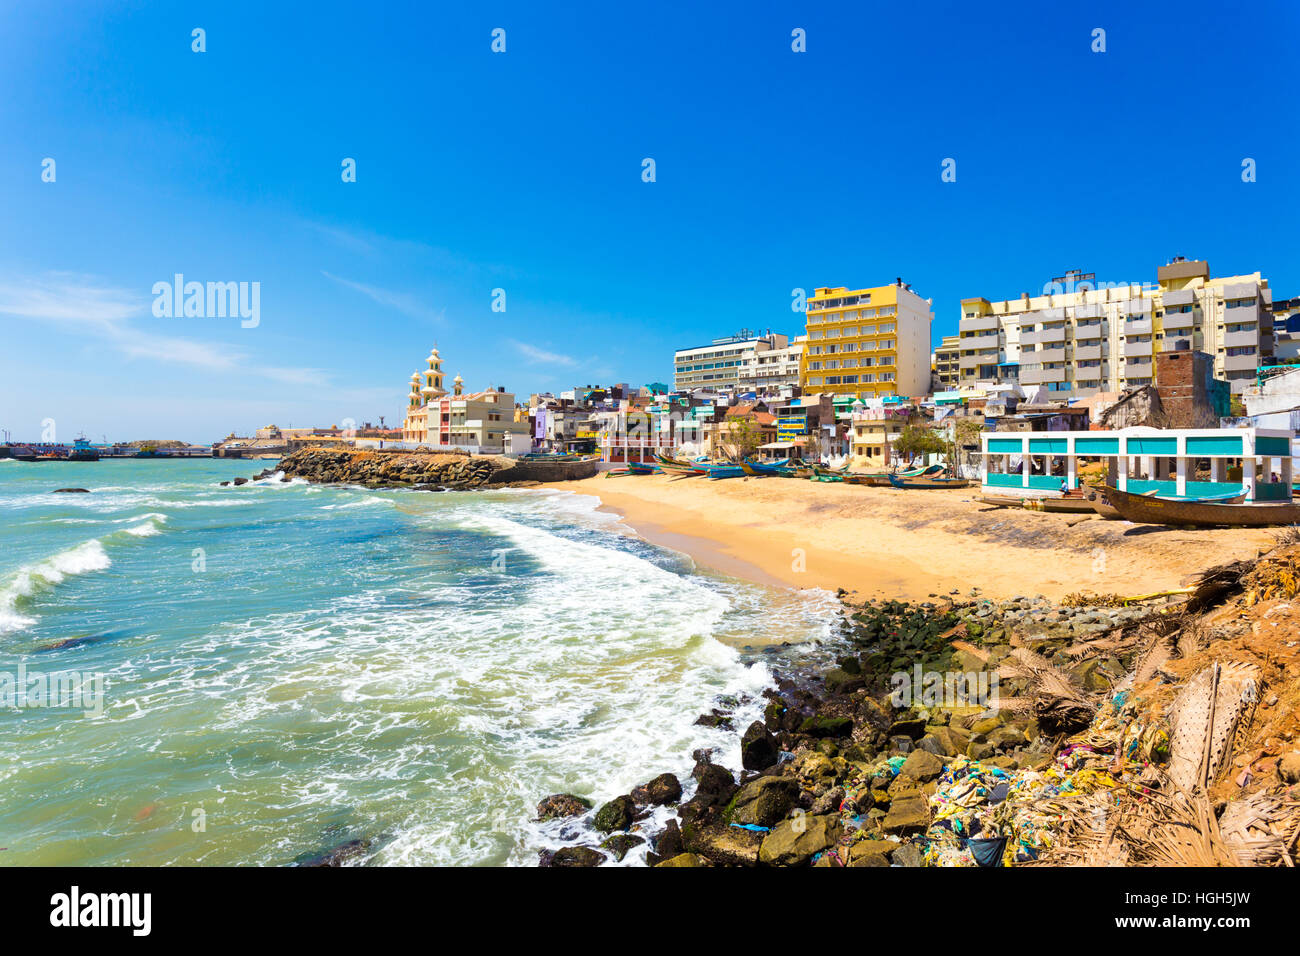 Colorful houses and large concrete hotels line a small beach near St Arokiyanathar Alayam Church at the southernmost tip India Stock Photo